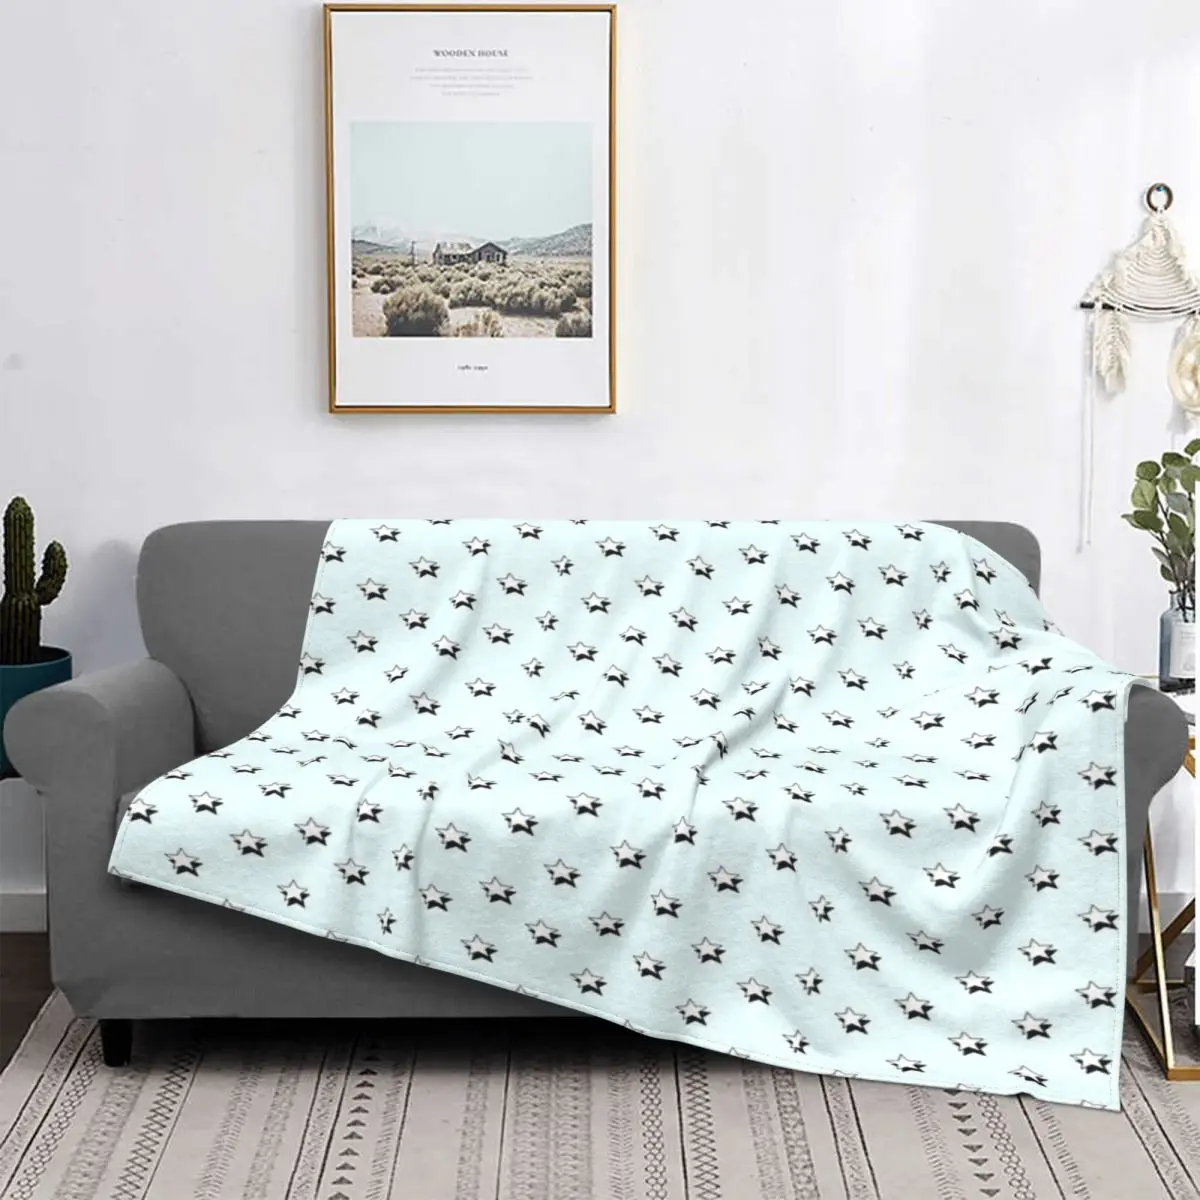 

Aesthetic Stars Blanket Bedspread Bed Plaid Bed Cover Picnic Plaid Kawaii Blanket Plaids And Covers